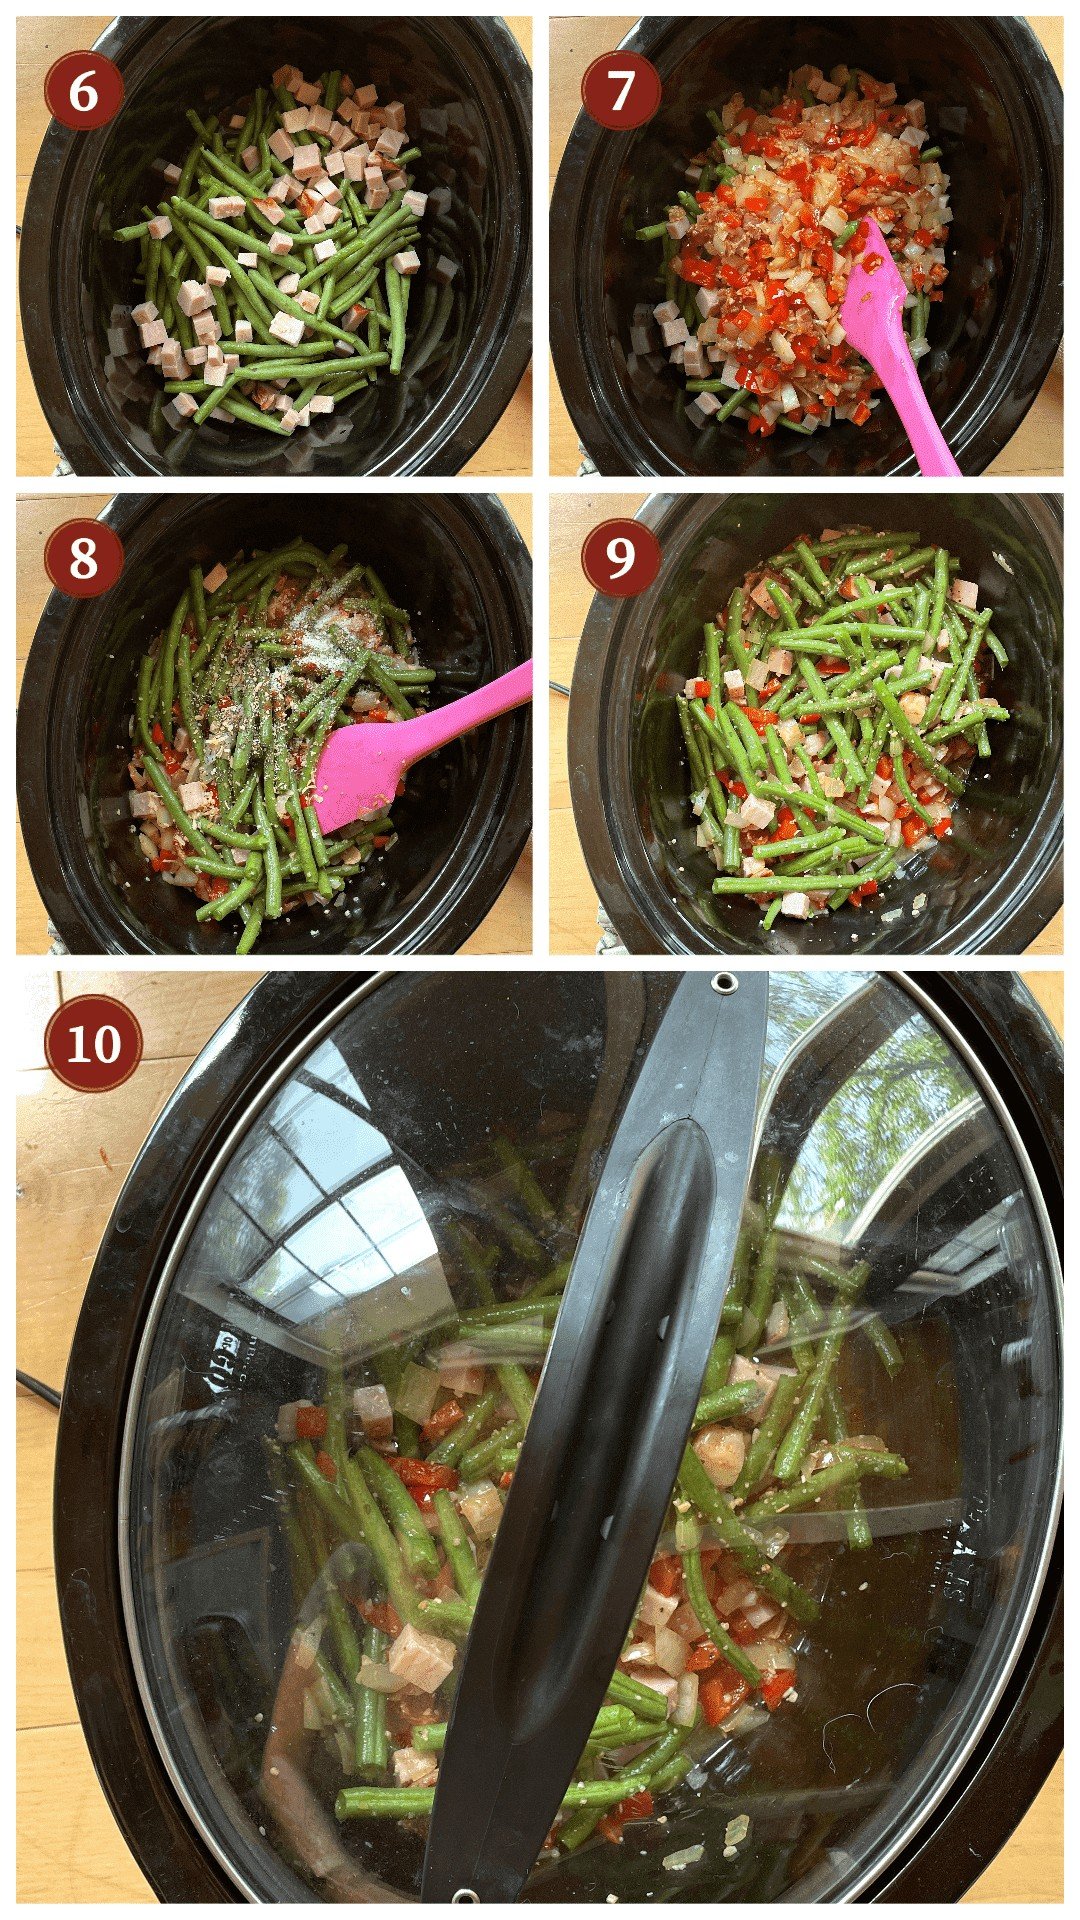 A collage of images showing how to cook green beans in a slow cooker, steps 6 - 10.